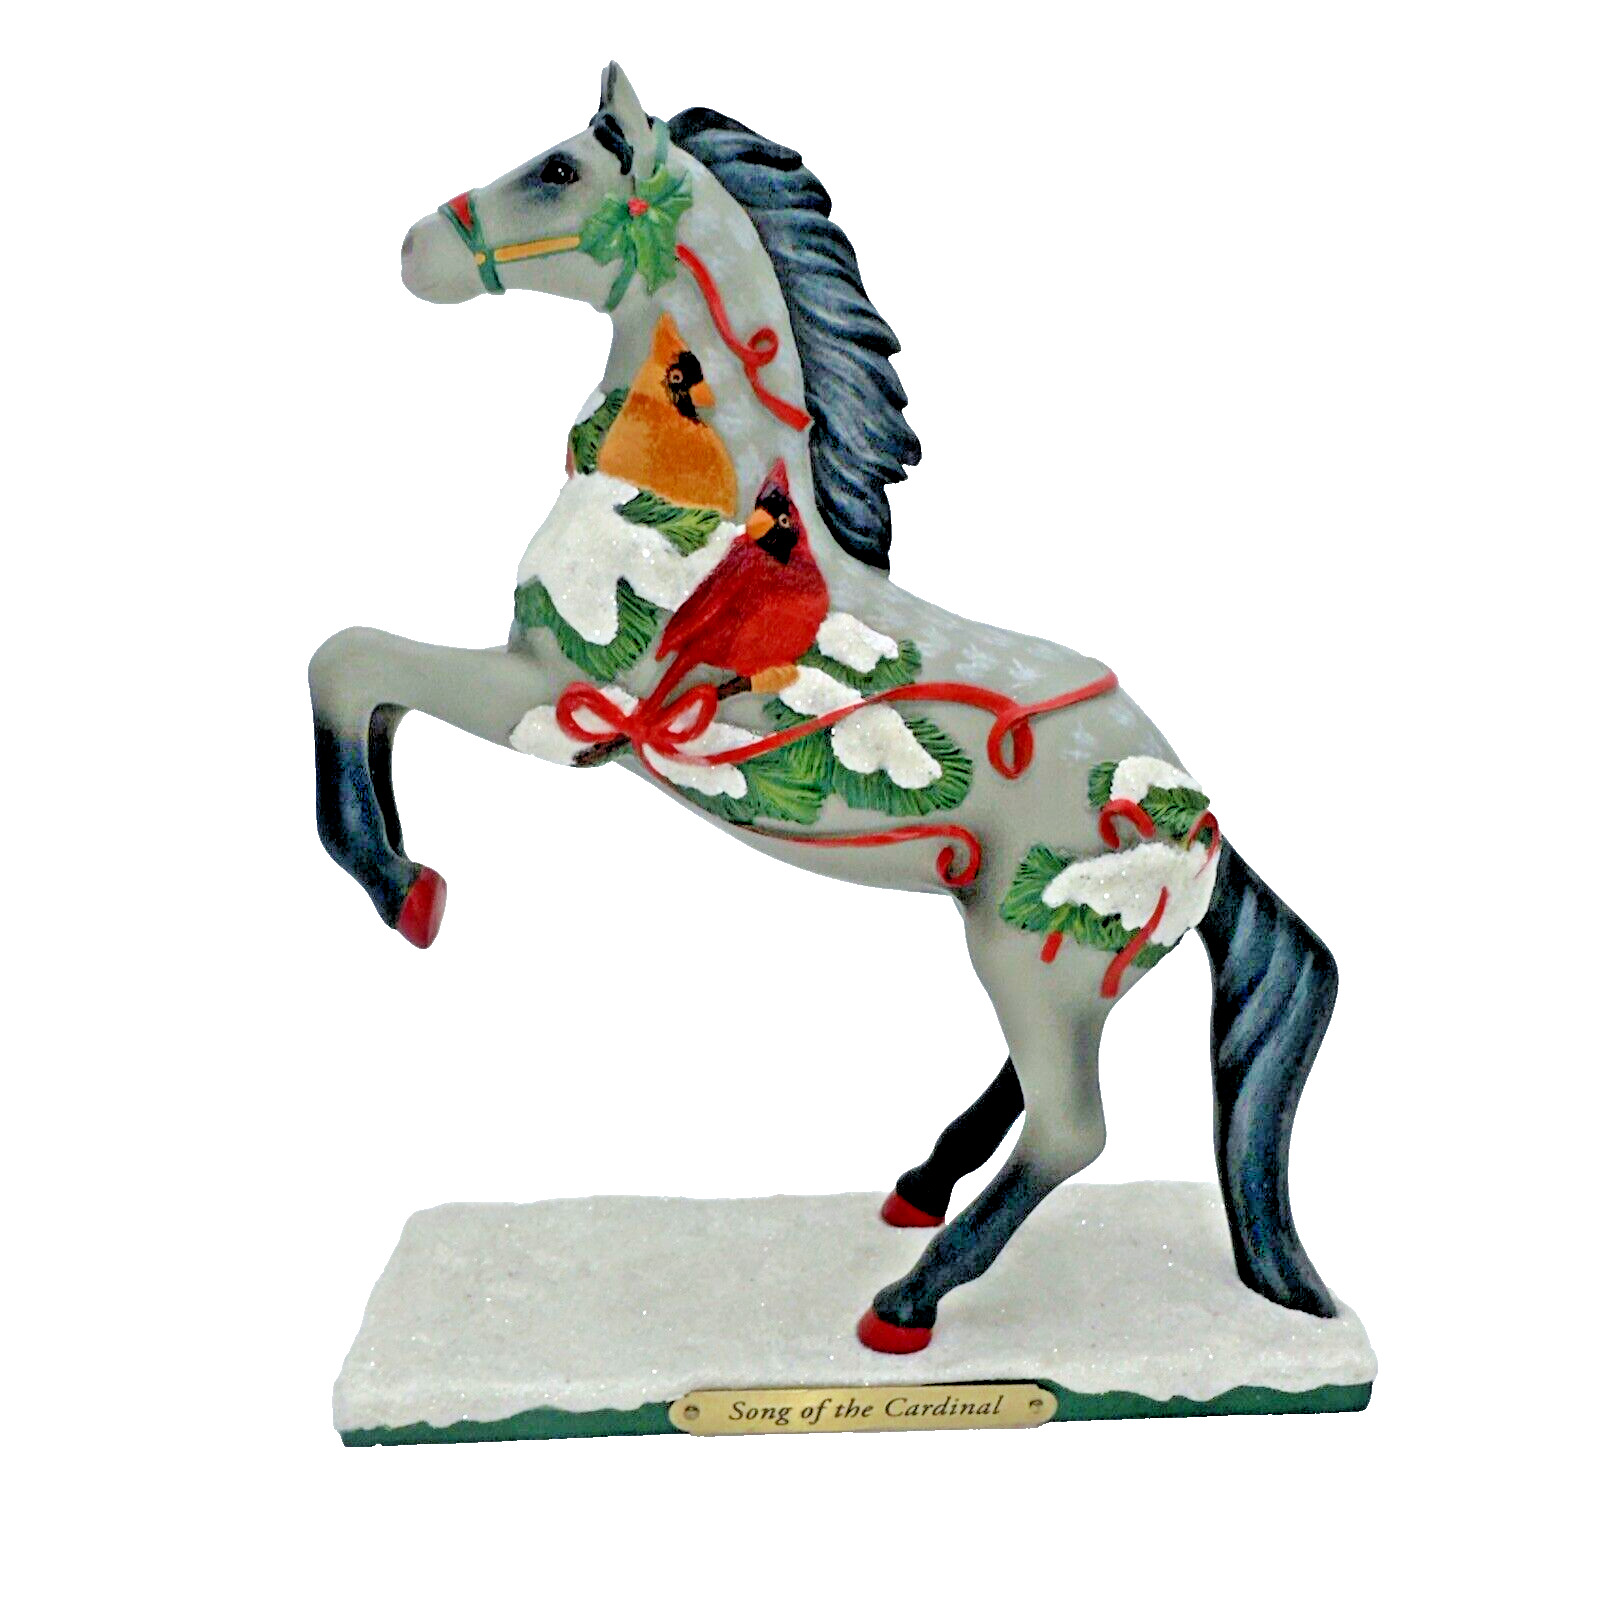 2016 Retired Trail of Painted Ponies SONG OF THE CARDINAL 1E/2789 by Laurie Cook